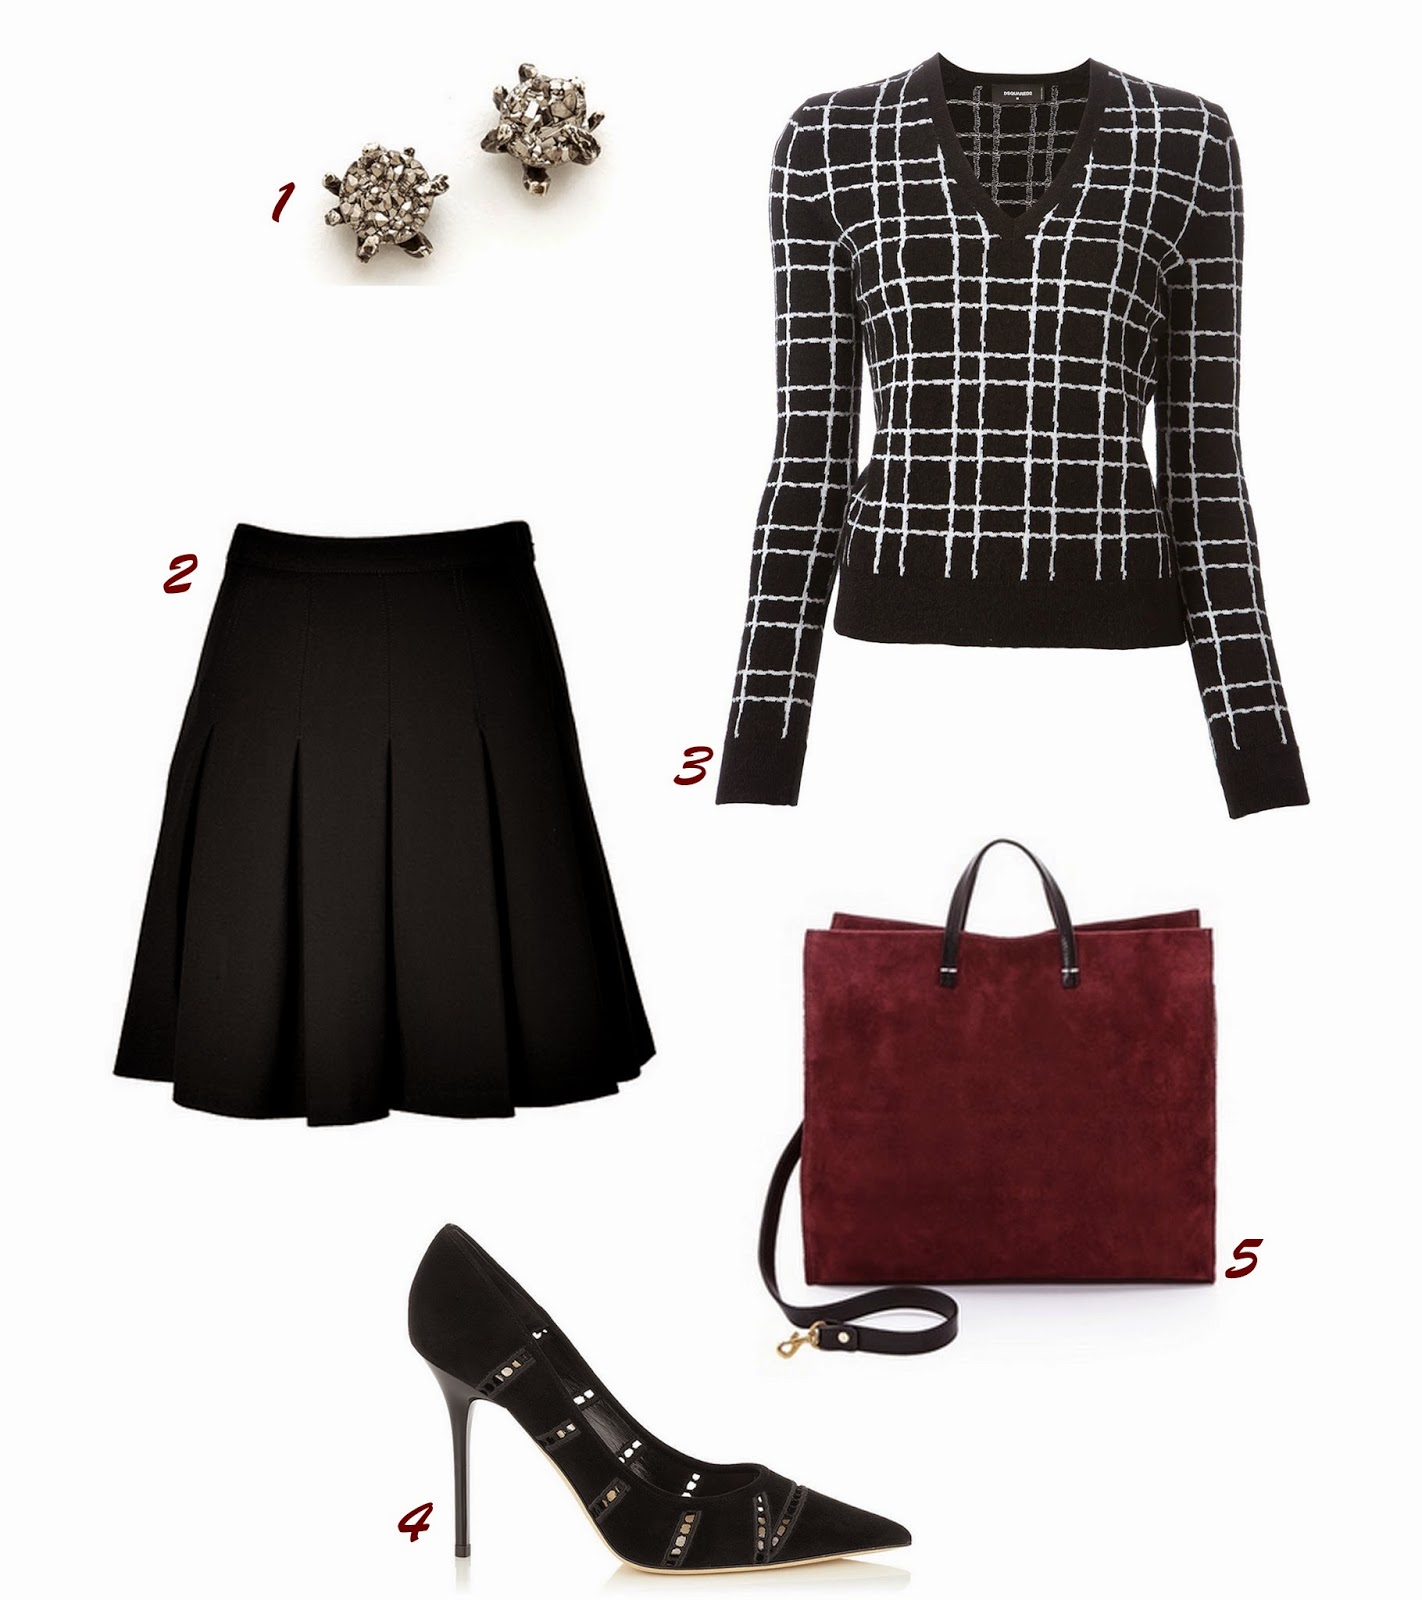 My Never Ending Daydream: Three Ways to Wear It: The Knit Sweater